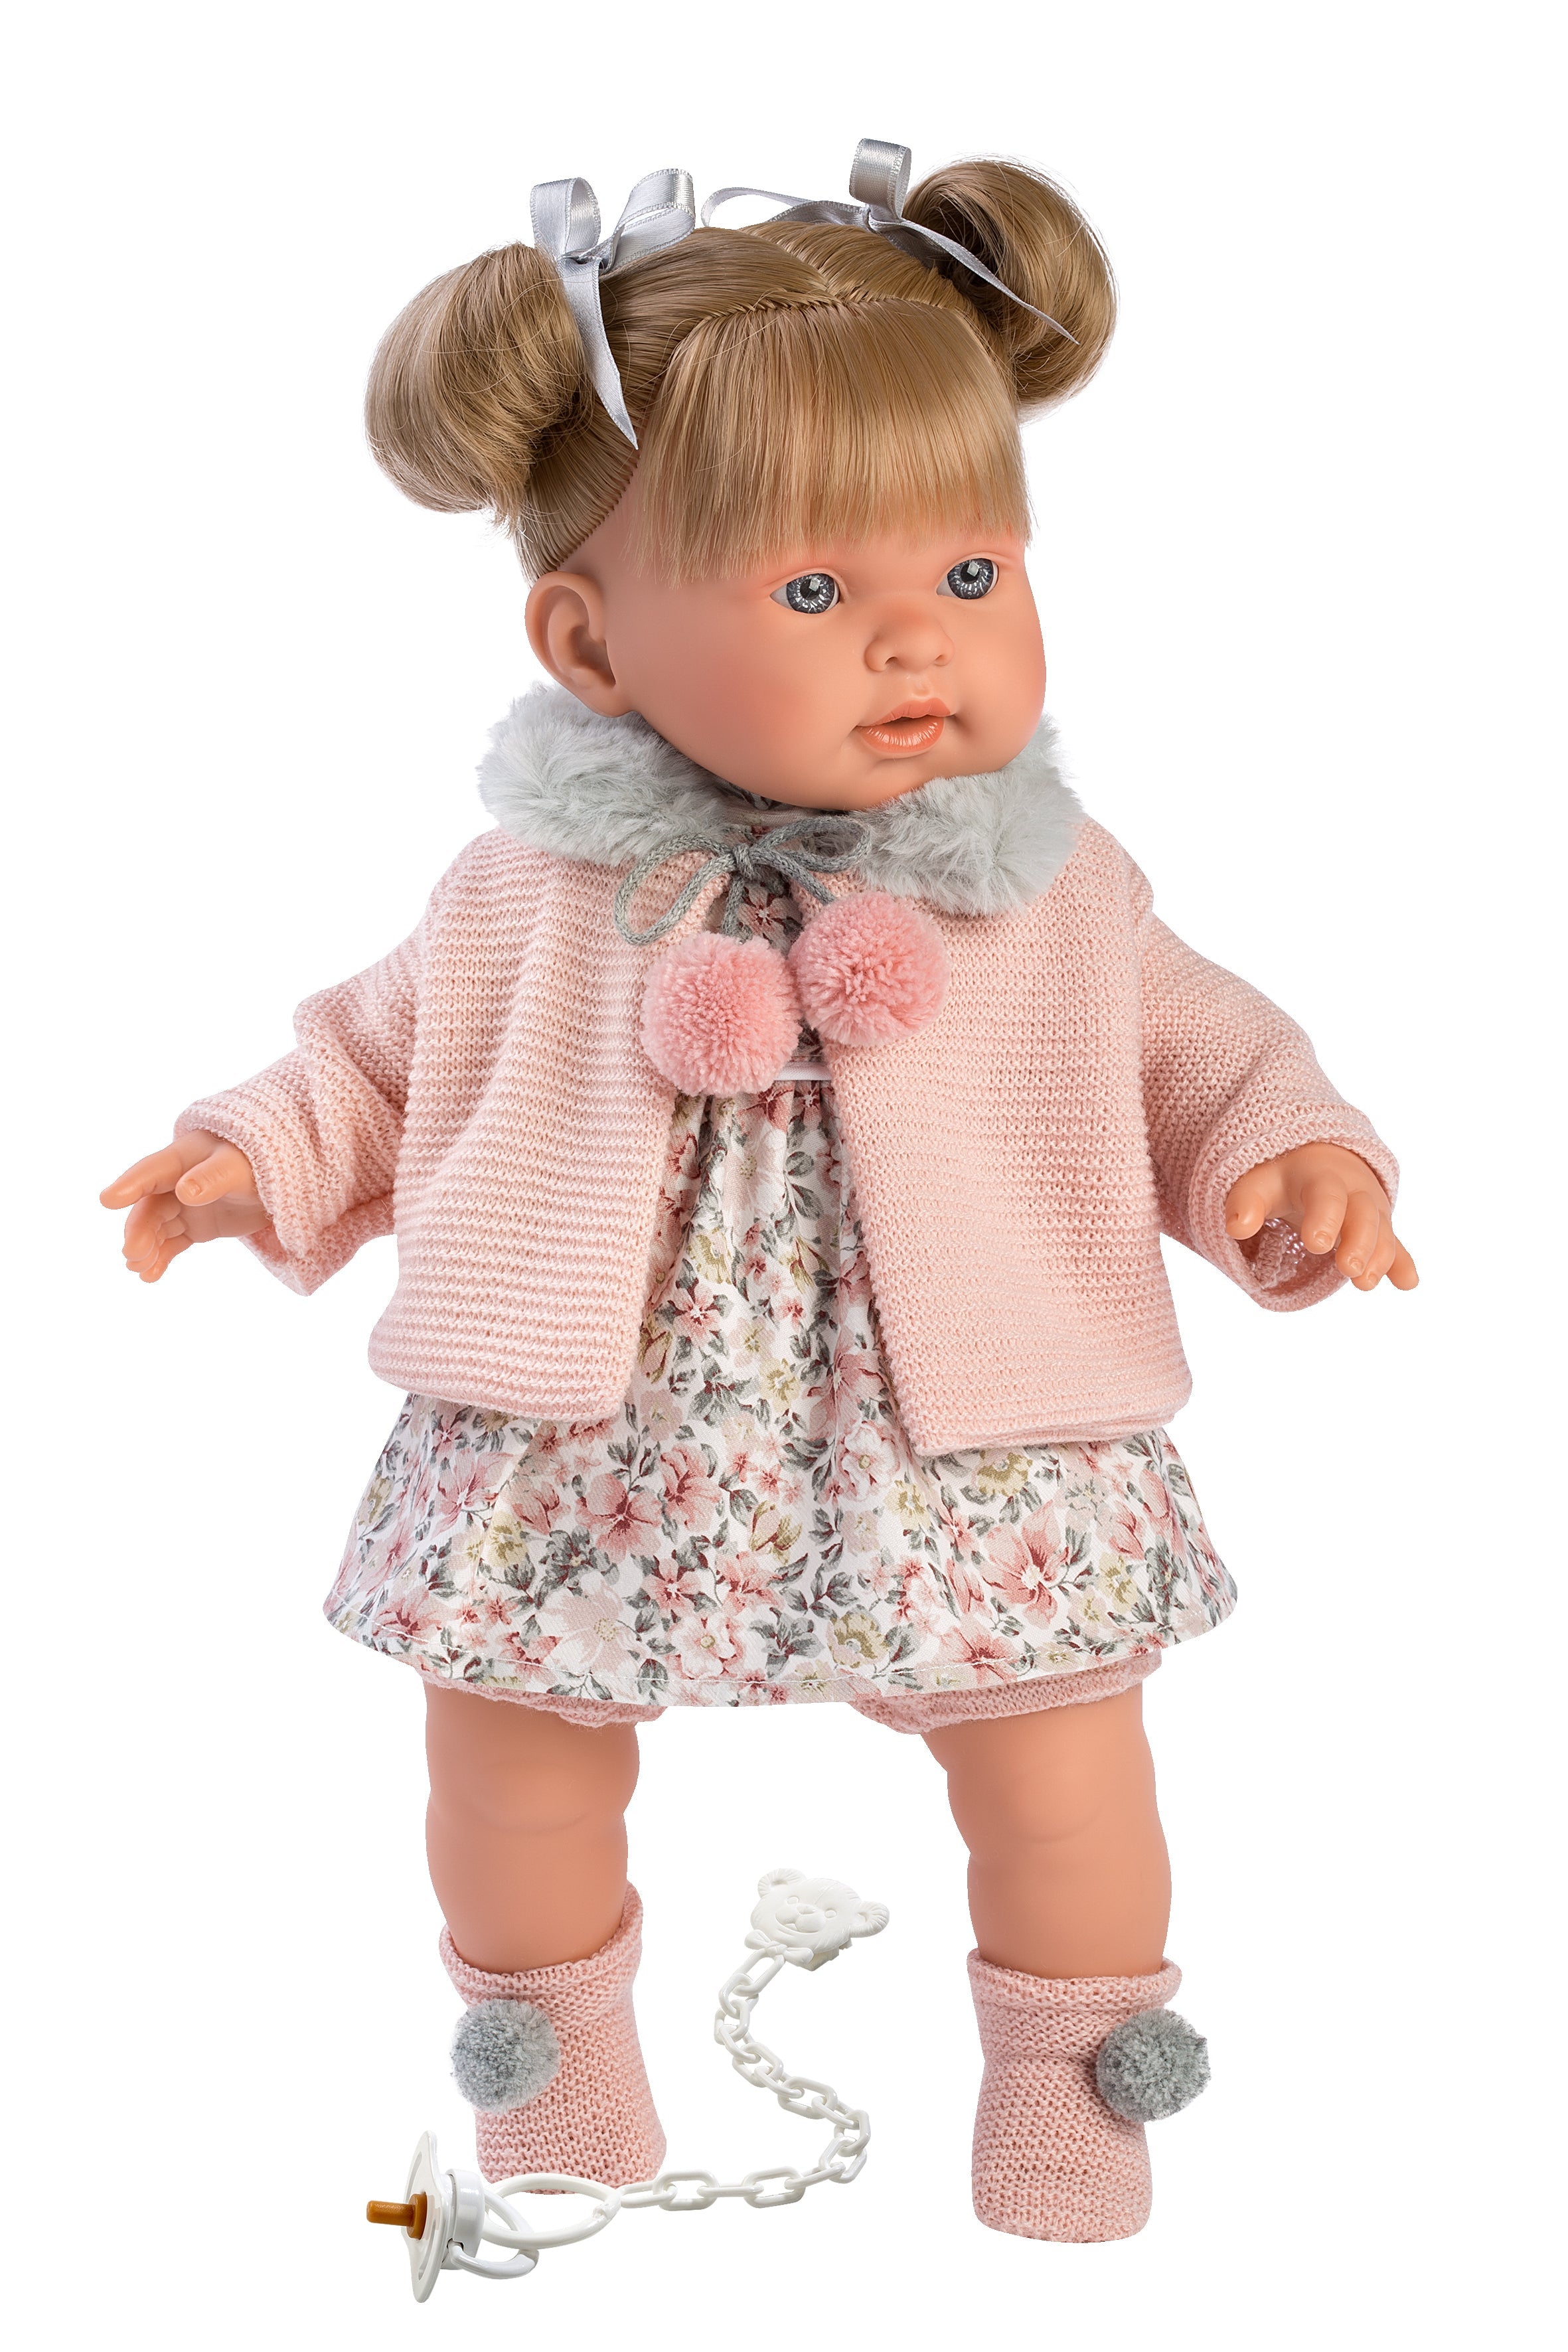 Llorens 16.5" Soft Body Crying Baby Doll Kelsey Dolls